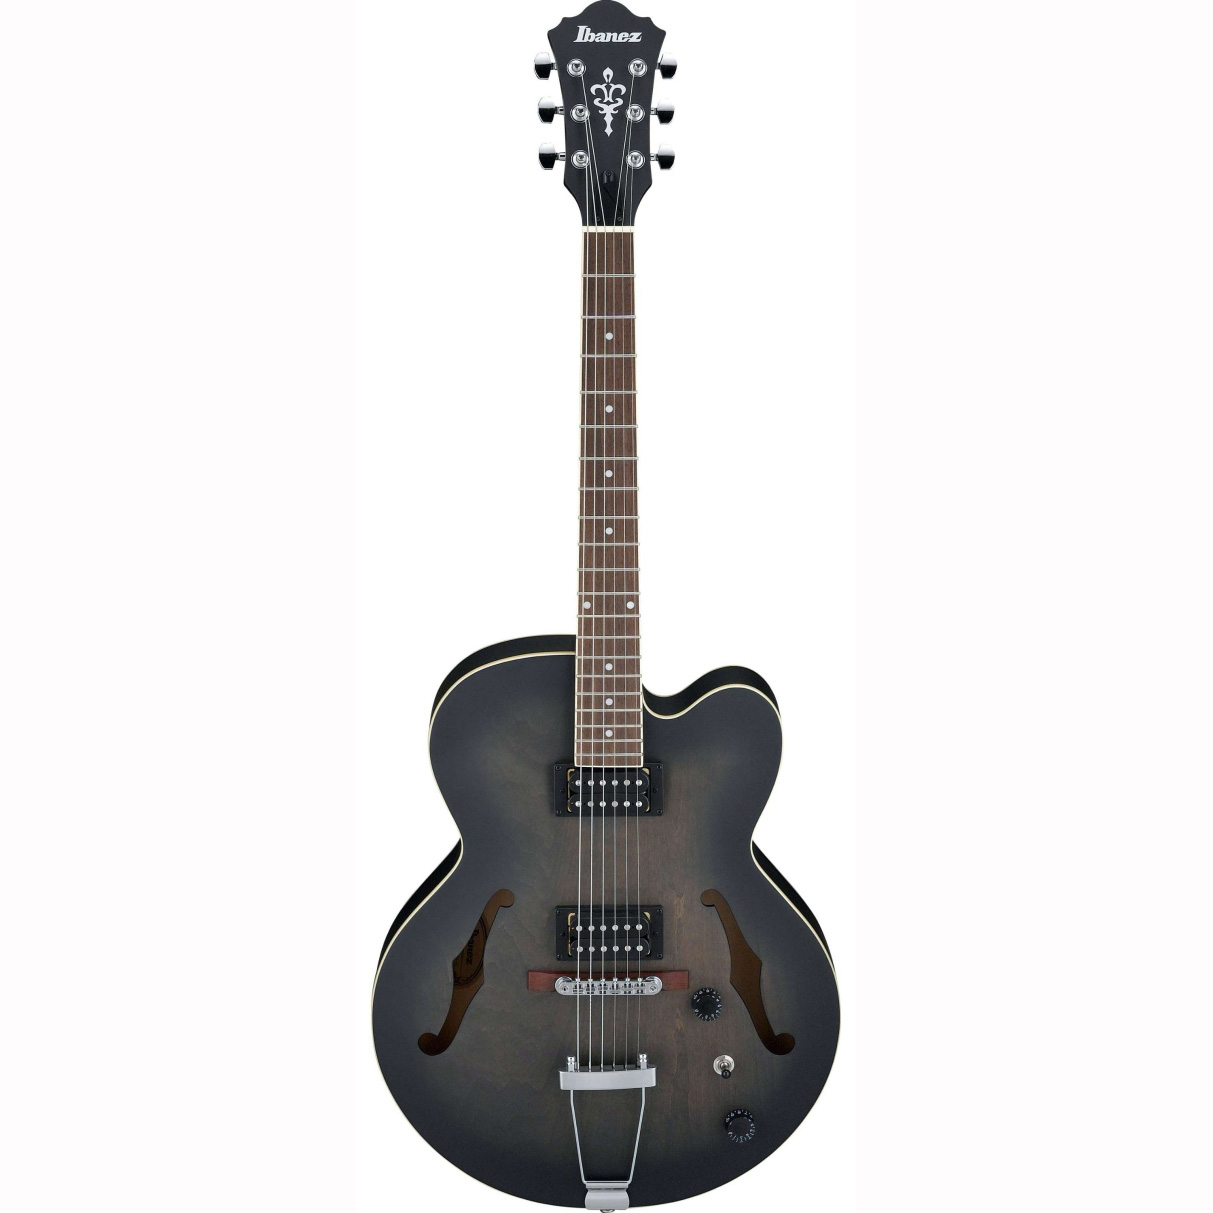 Ibanez Af55-tkf Artcore Full-hollow Body Электрогитары